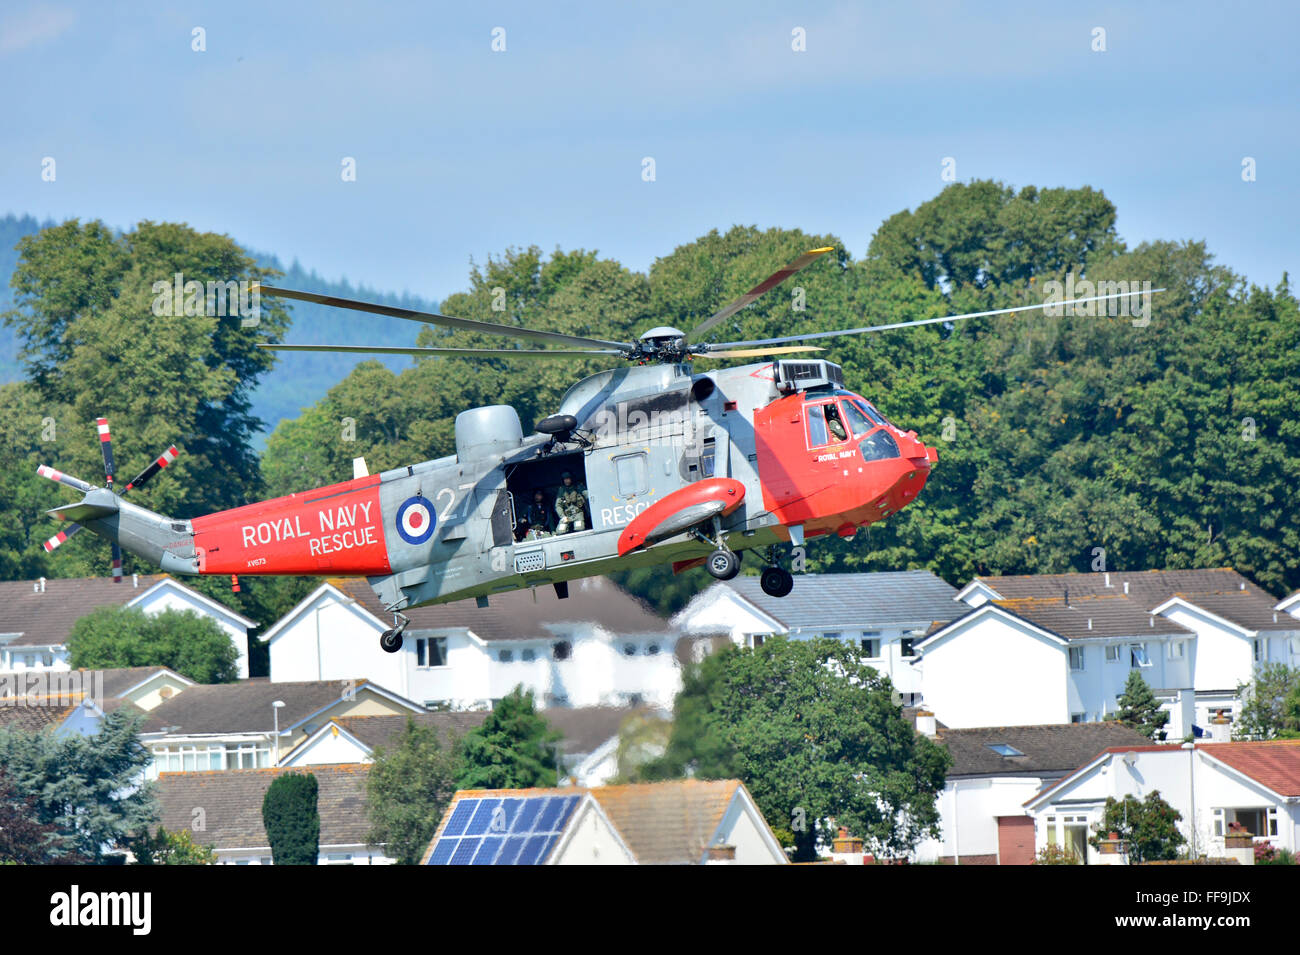 Sea King MK5 Search & Rescue Helicopter (Royal Navy Rescue) Stock Photo